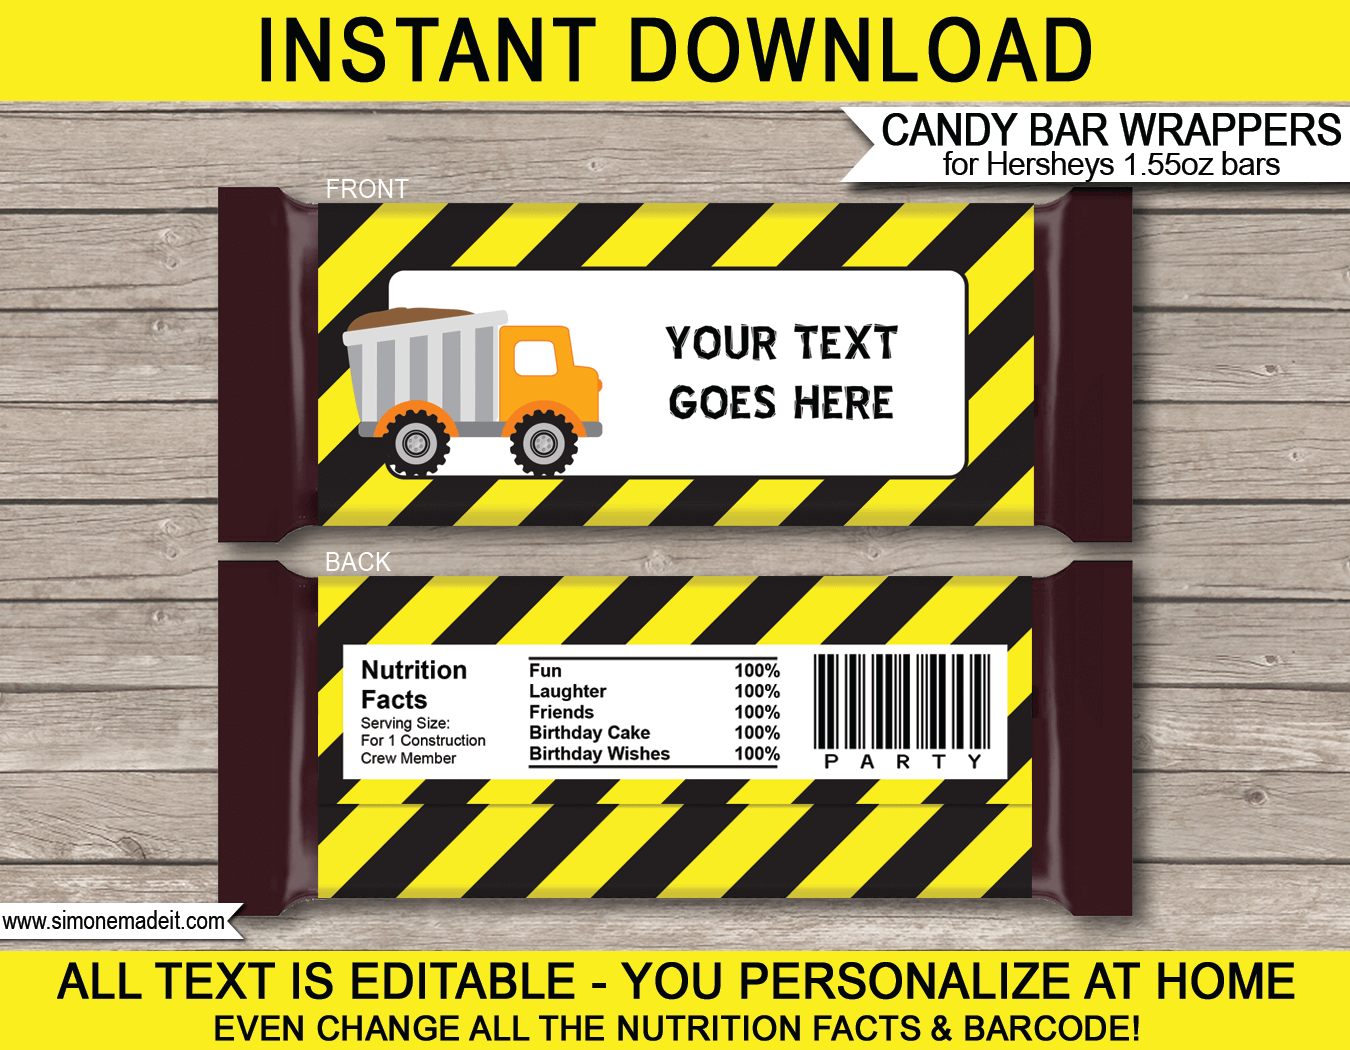 Construction Hershey Candy Bar Wrappers | Dump Truck | Birthday Party Favors | Personalized Candy Bars | Editable Template | INSTANT DOWNLOAD $3.00 via simonemadeit.com